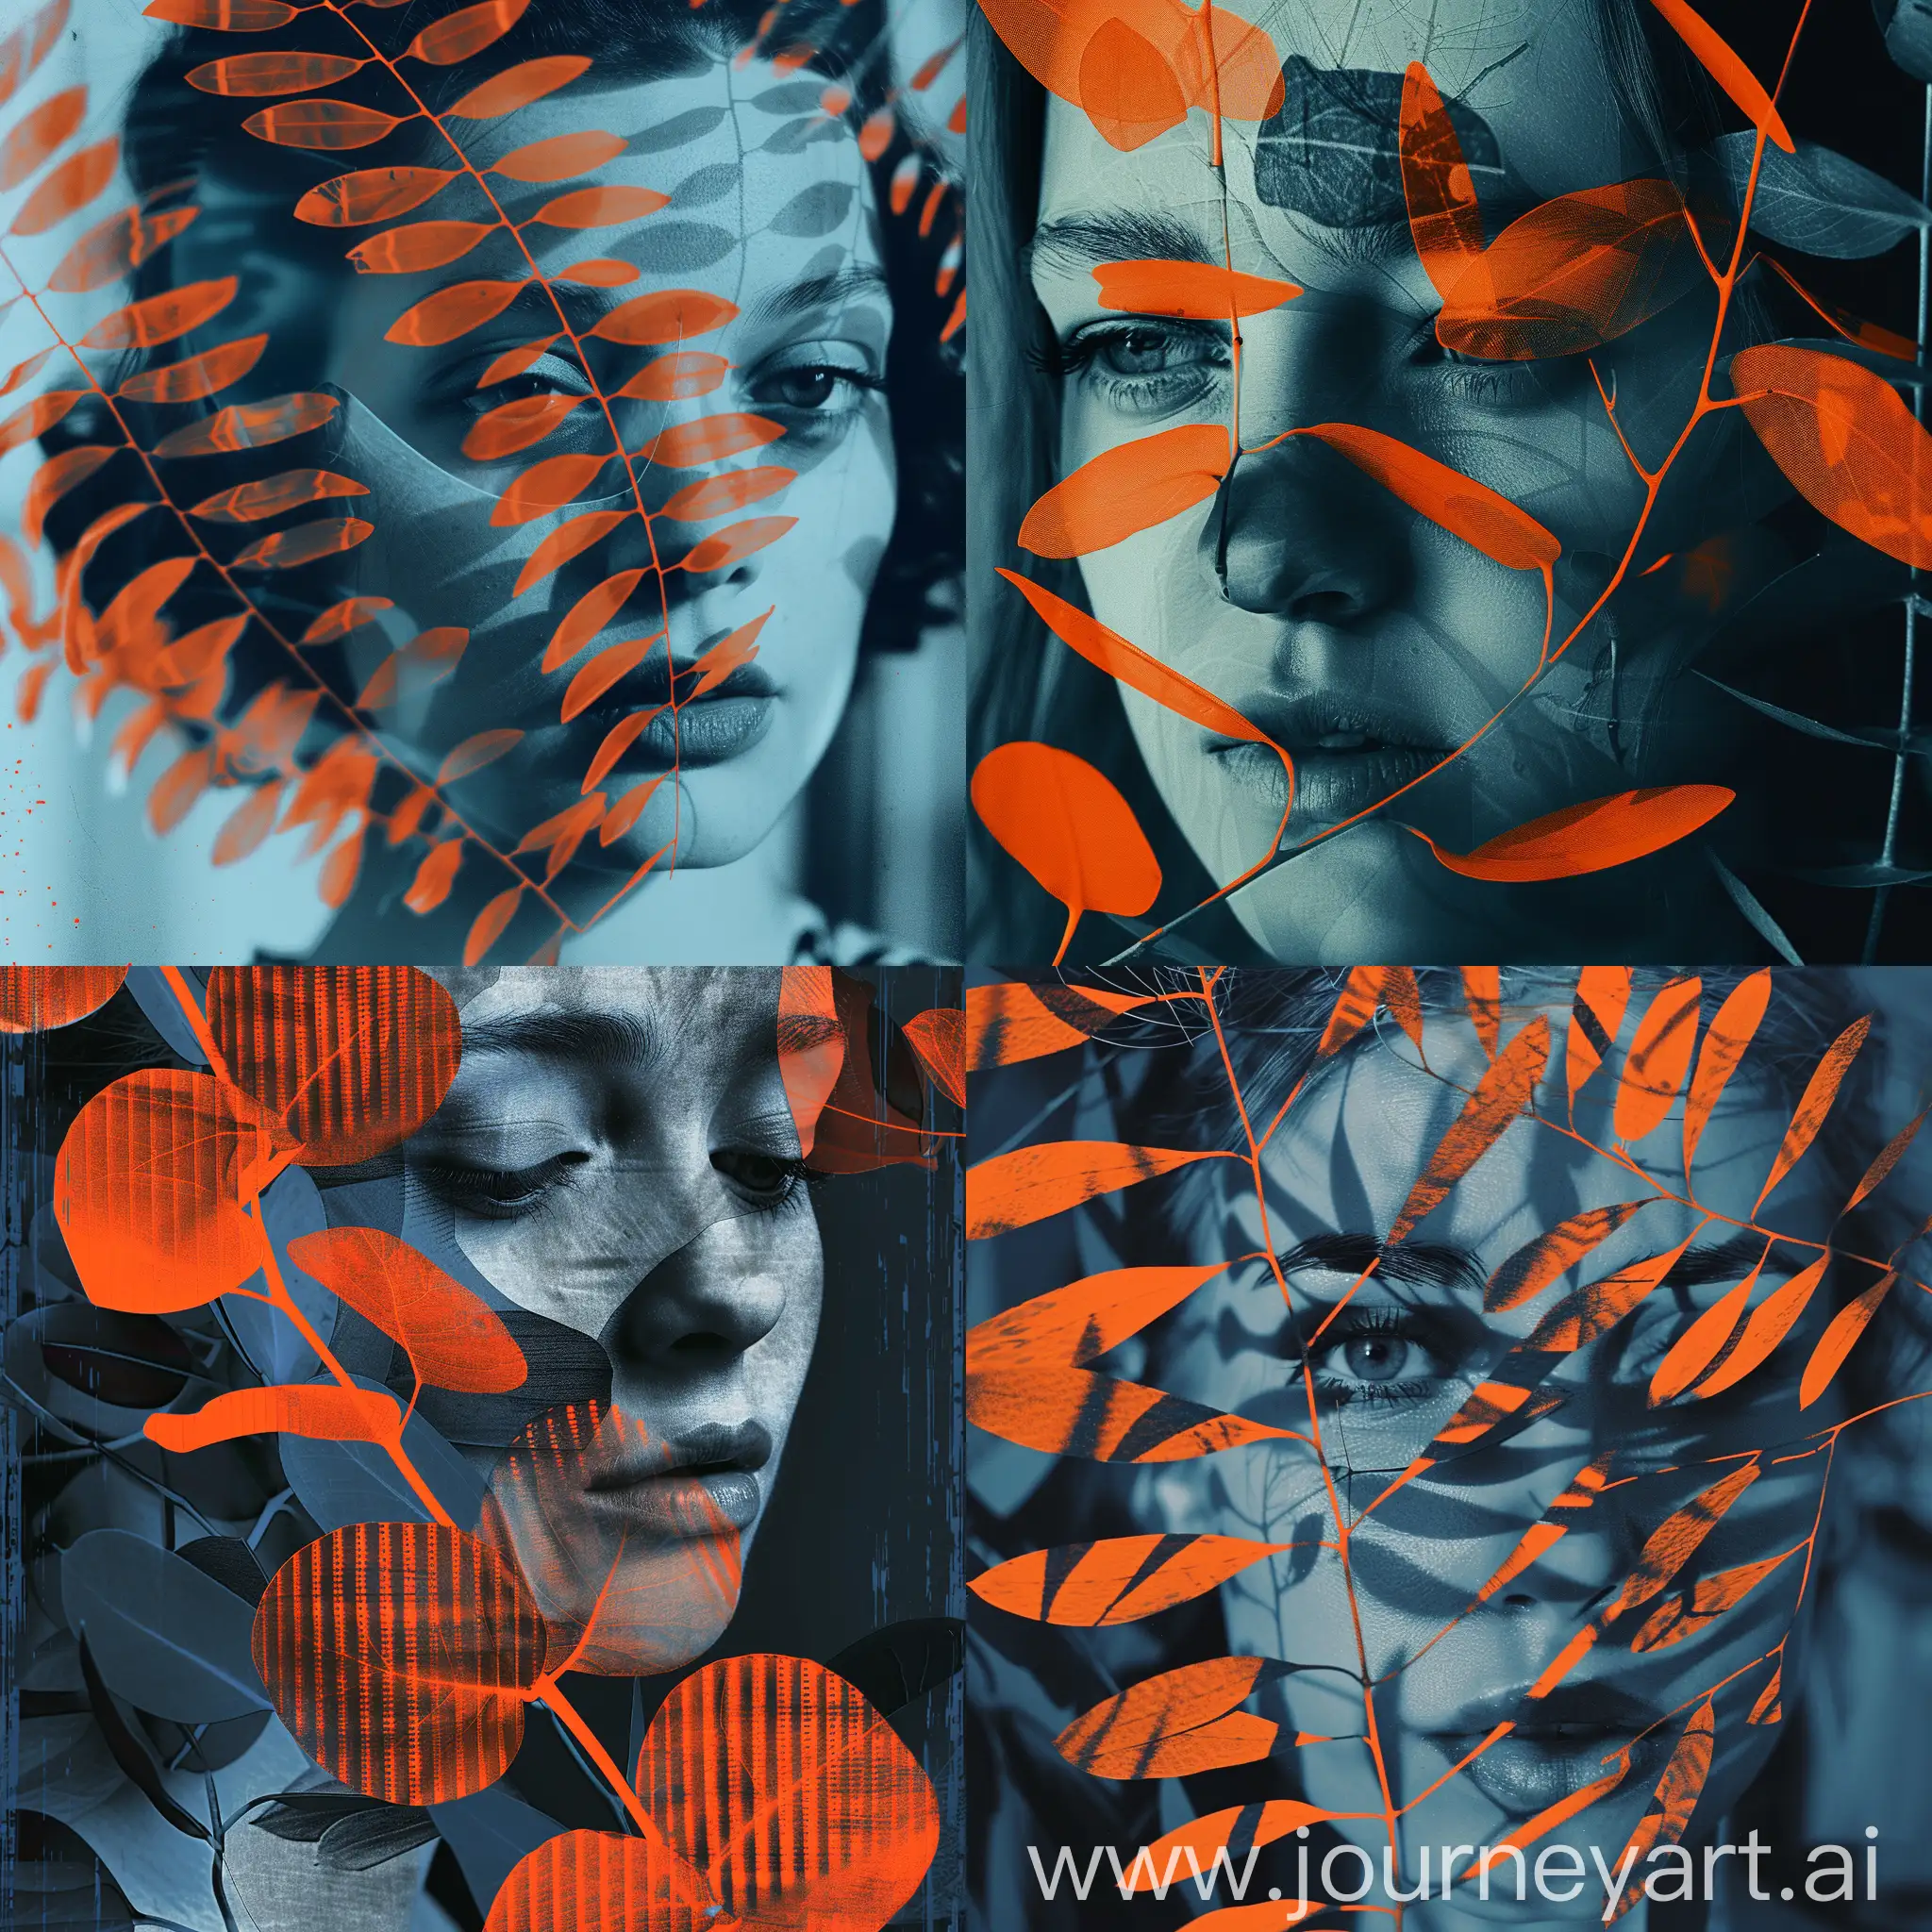 Vertical format film grain photo style capturing an enigmatic mood. The image features a woman's face in monochrome tones, dominated by deep blues and greys, with a striking contrast of bright orange lenticular shapes resembling eucalyptus leaves (